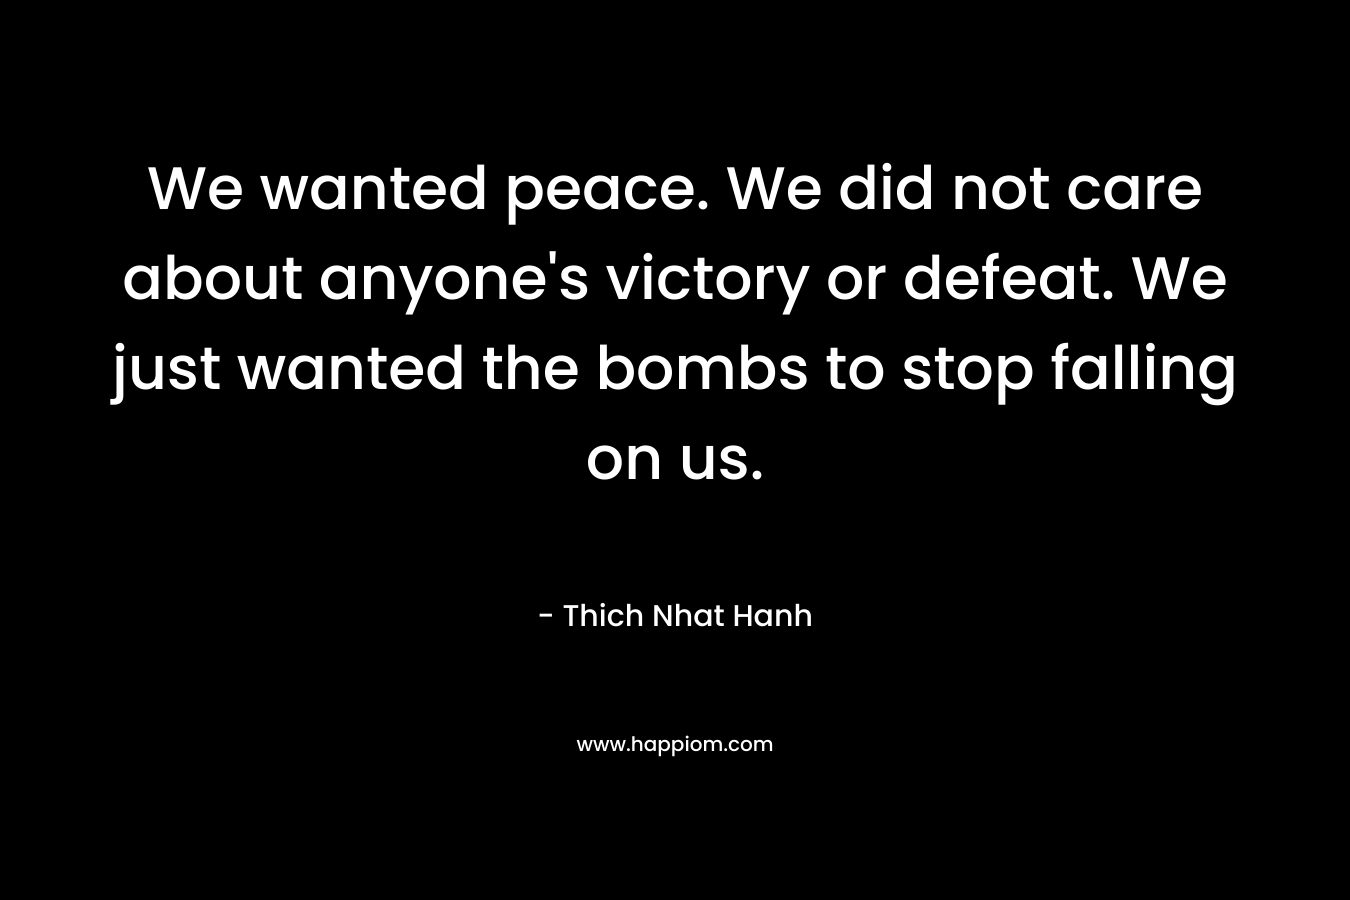 We wanted peace. We did not care about anyone’s victory or defeat. We just wanted the bombs to stop falling on us. – Thich Nhat Hanh